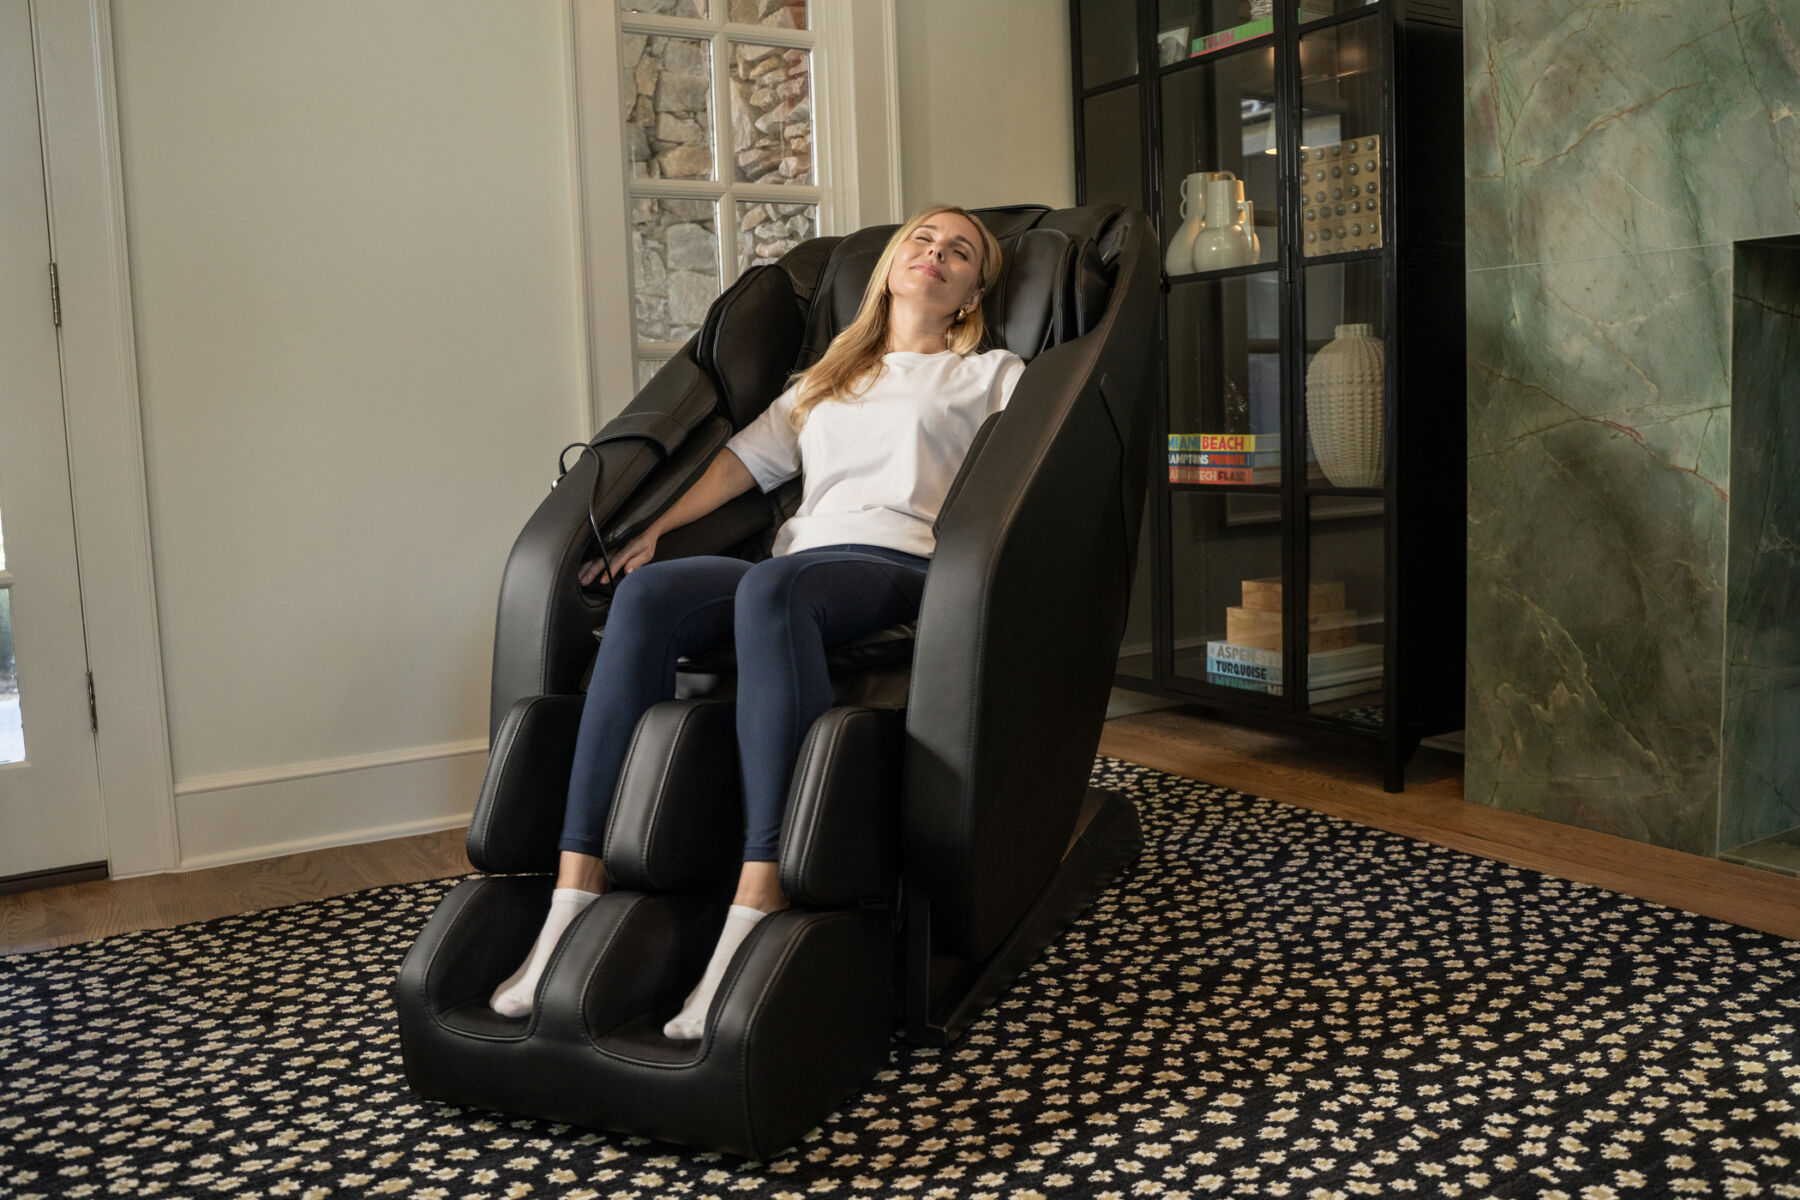 Massage Chairs To Restore Body and Mind